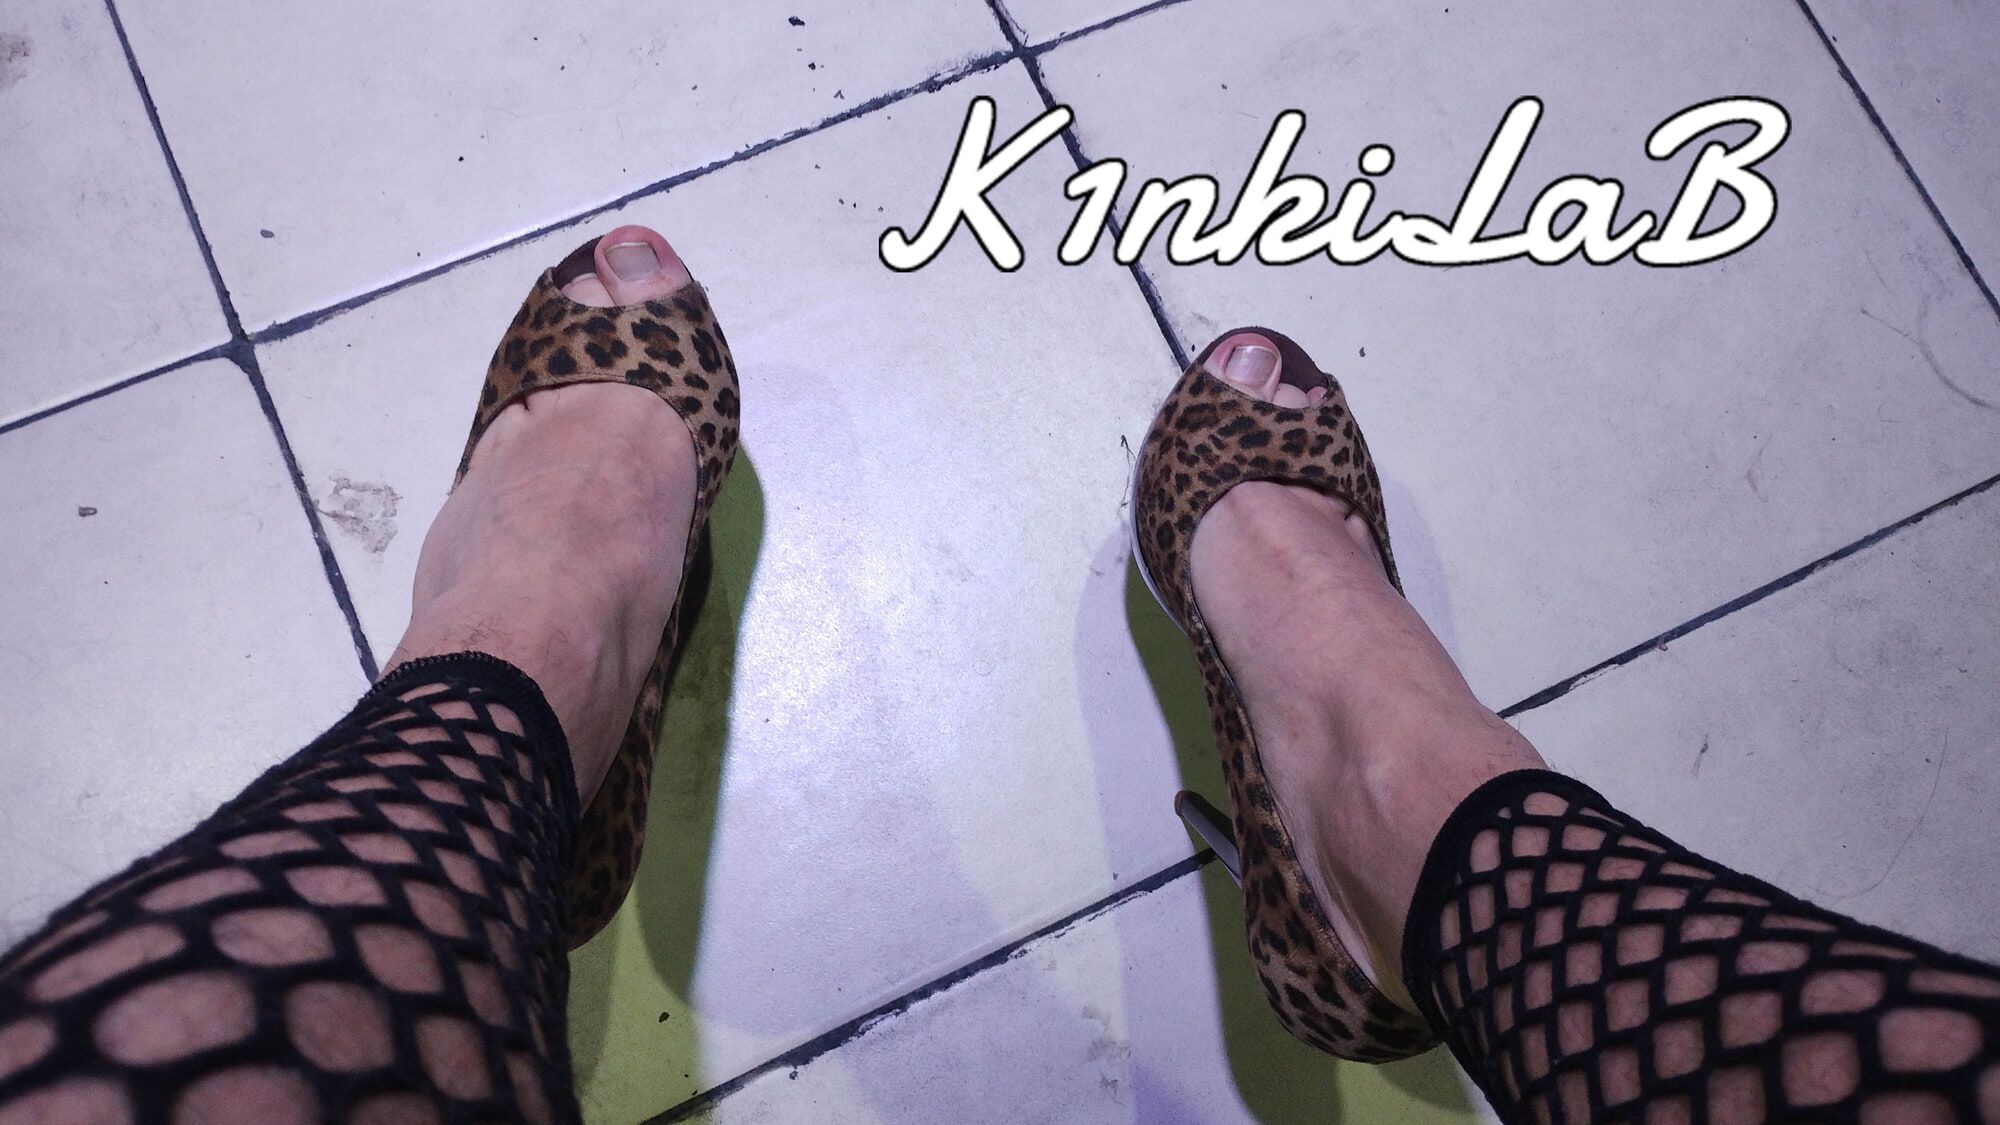 Punished with fishnet stockings and leopard heels #4